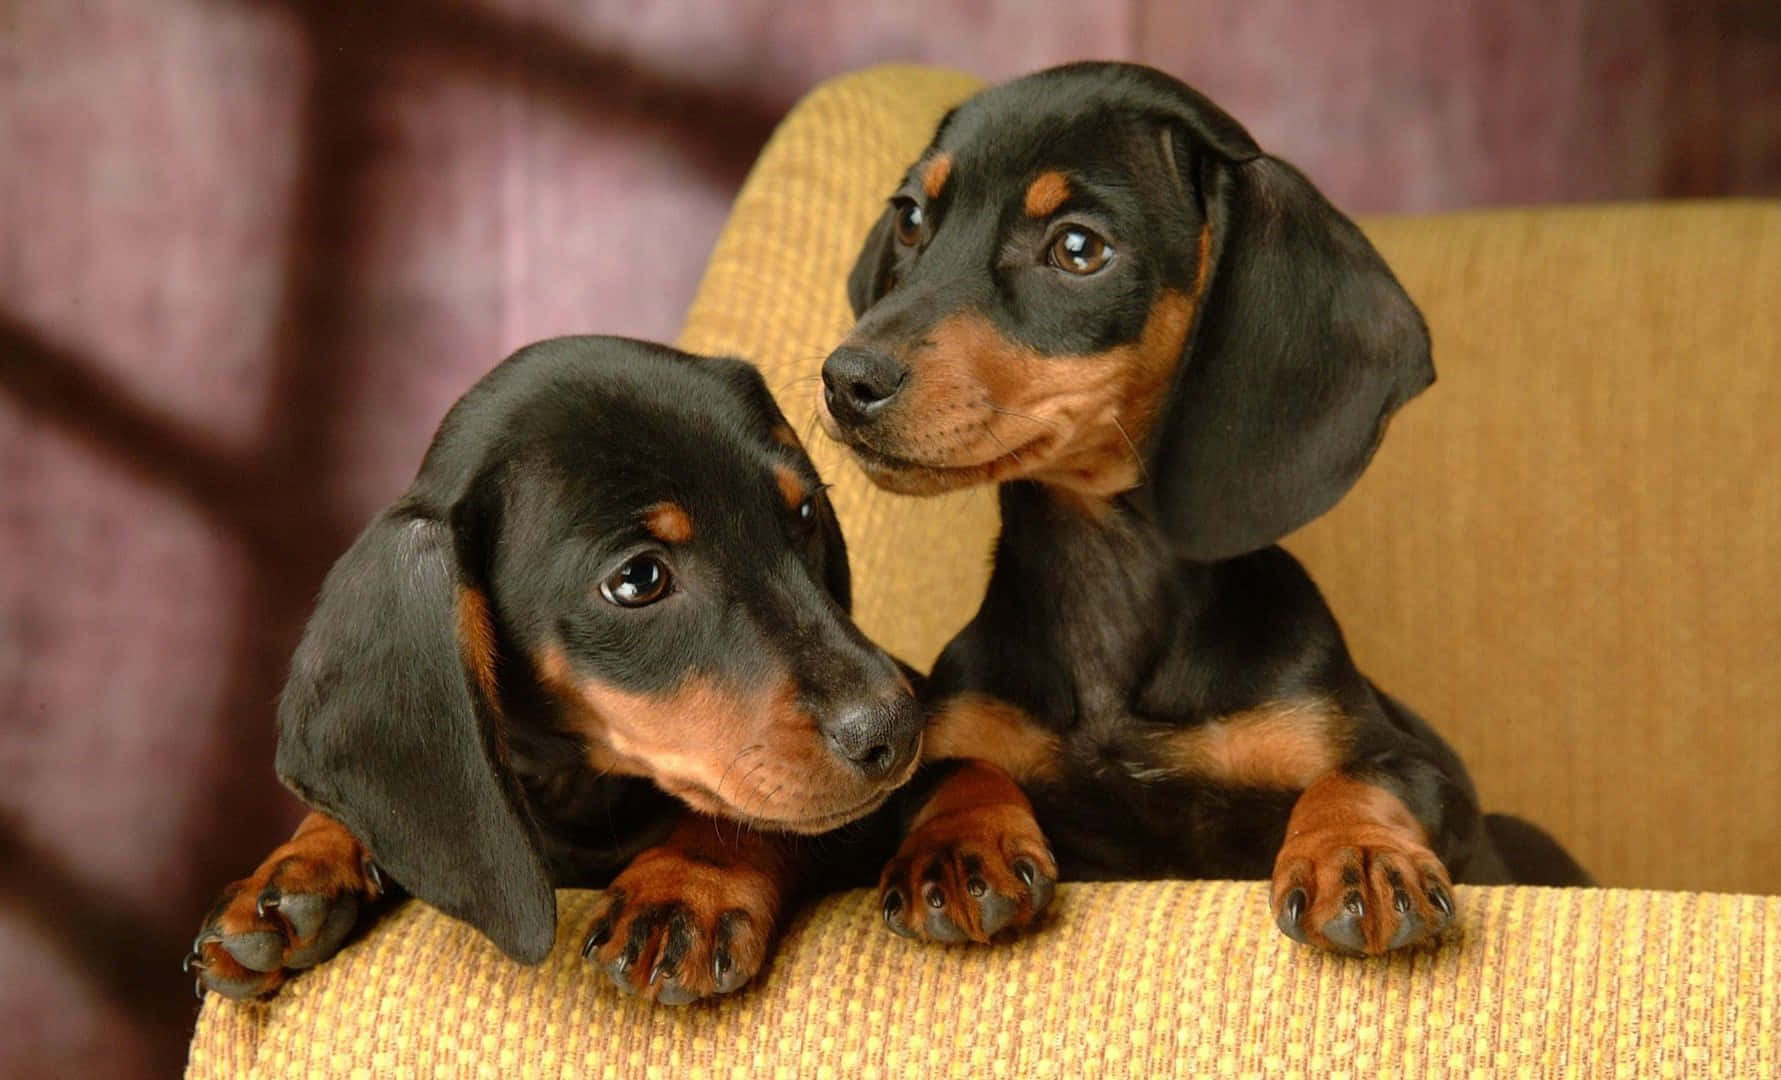 "Cuteness Unleashed: A Sweet Little Dachshund Poses For A Photo"